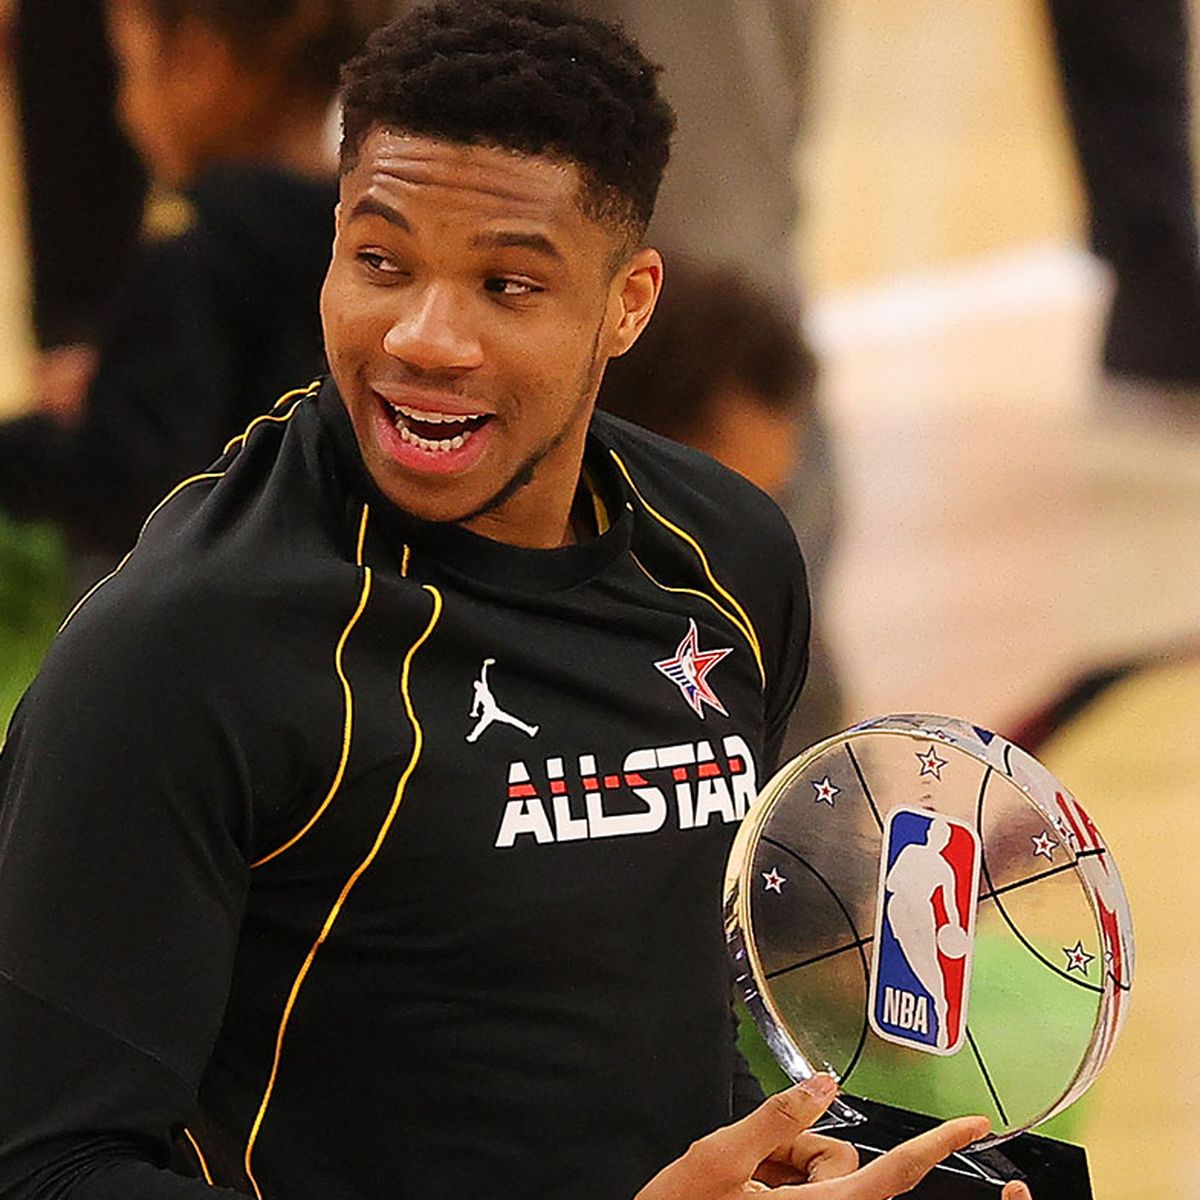 Giannis Antetokounmpo Couldn't Miss at the All-Star Game - The New